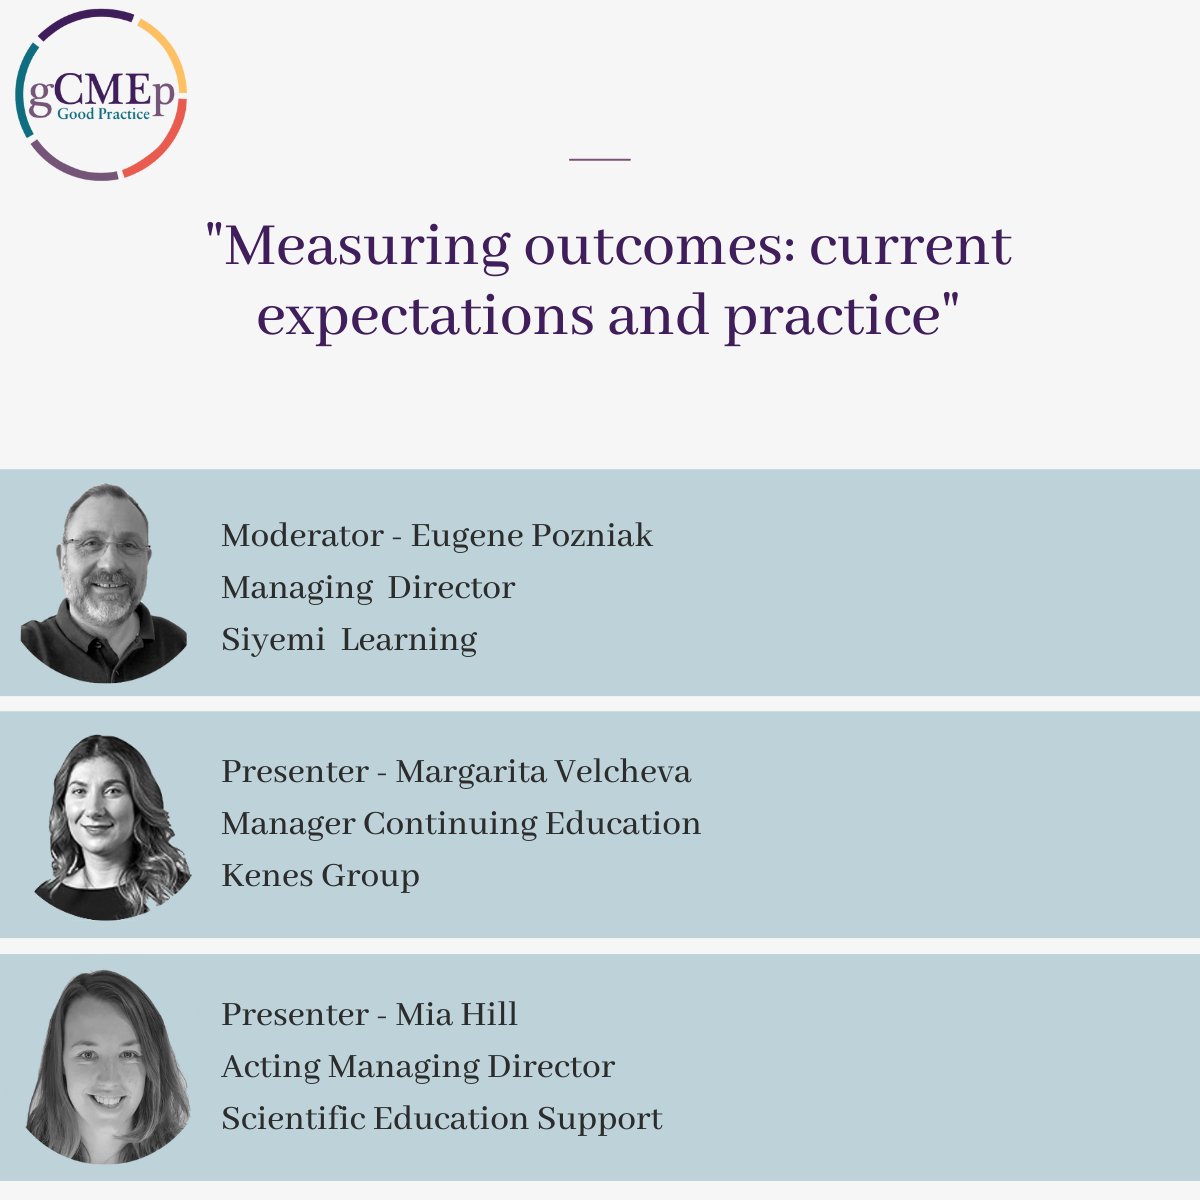 Measuring outcomes: current expectations and practice, the latest Good CME Practice group webinar taking a look at the scene in Europe. Recording is available at gCMEp.org/webinars, also the latest episode of the European CME Forum podcast. #meded #cmecpd #cmechat